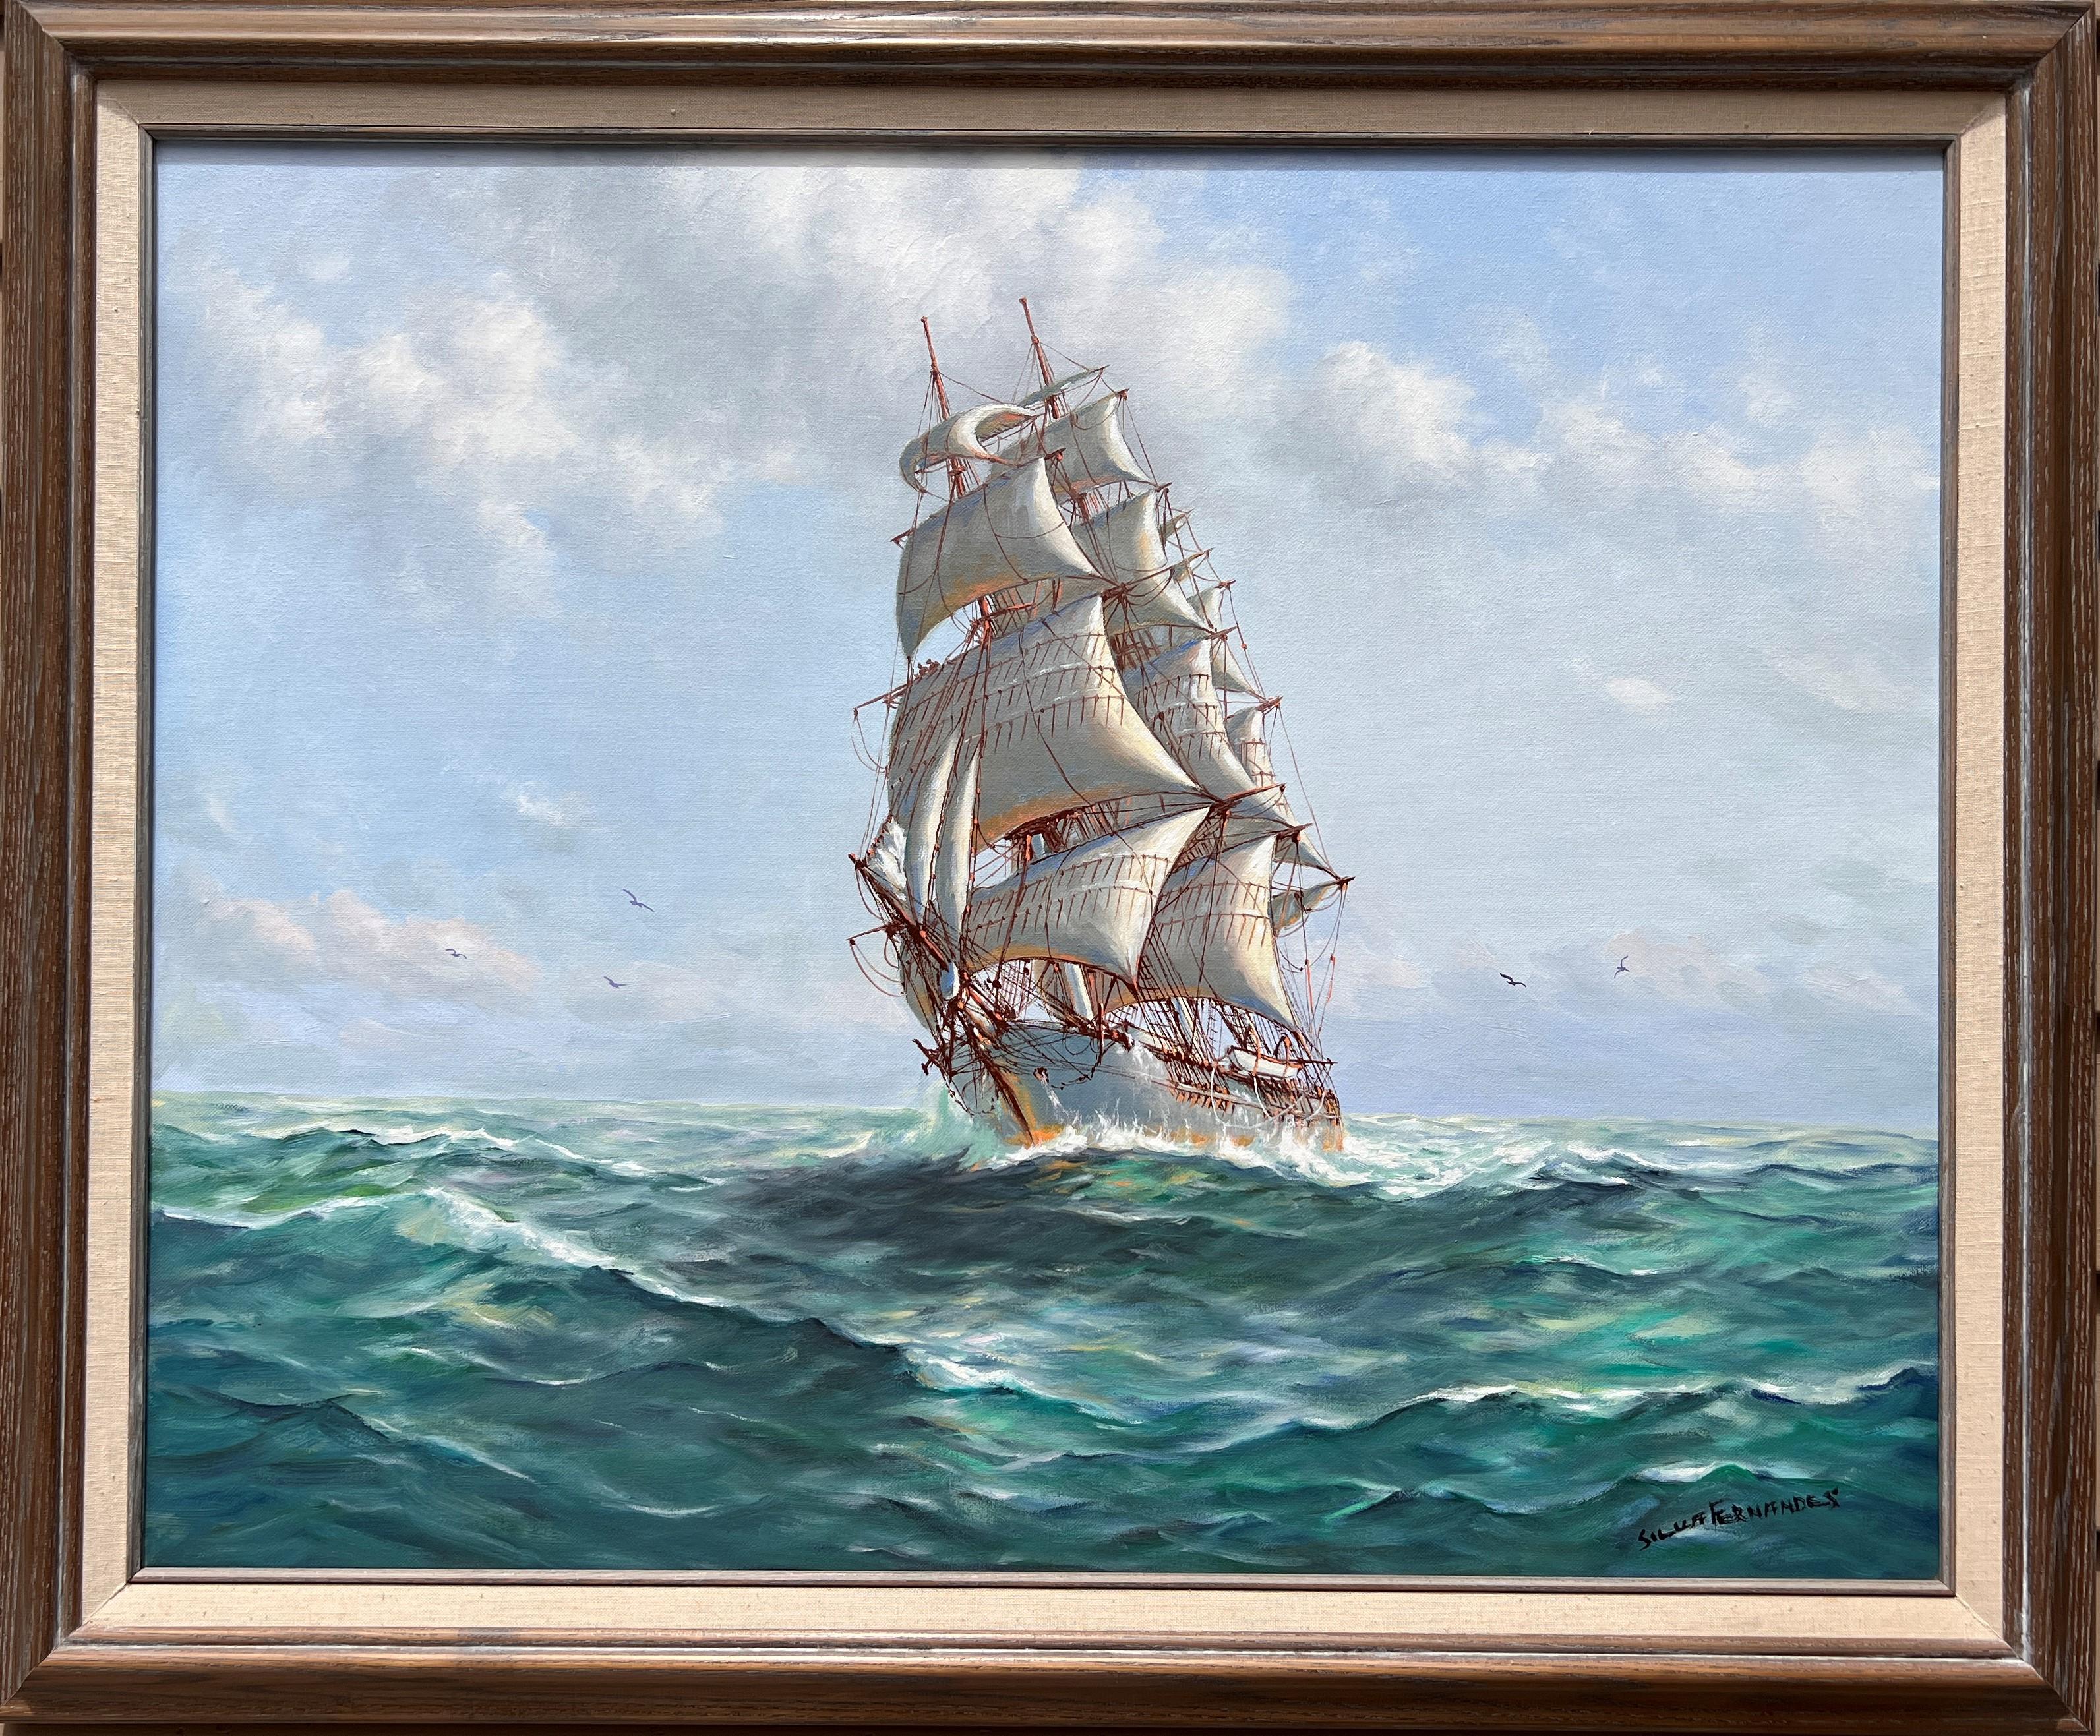 This is an amazing original oil painting on canvas of the famous Portuguese-American painter, Humberto da Silva Fernandes (1937-2005) depicting a Clipper Ship under Full Sail and a group of sailors following a whale in a stormy sea. 

Humberto da